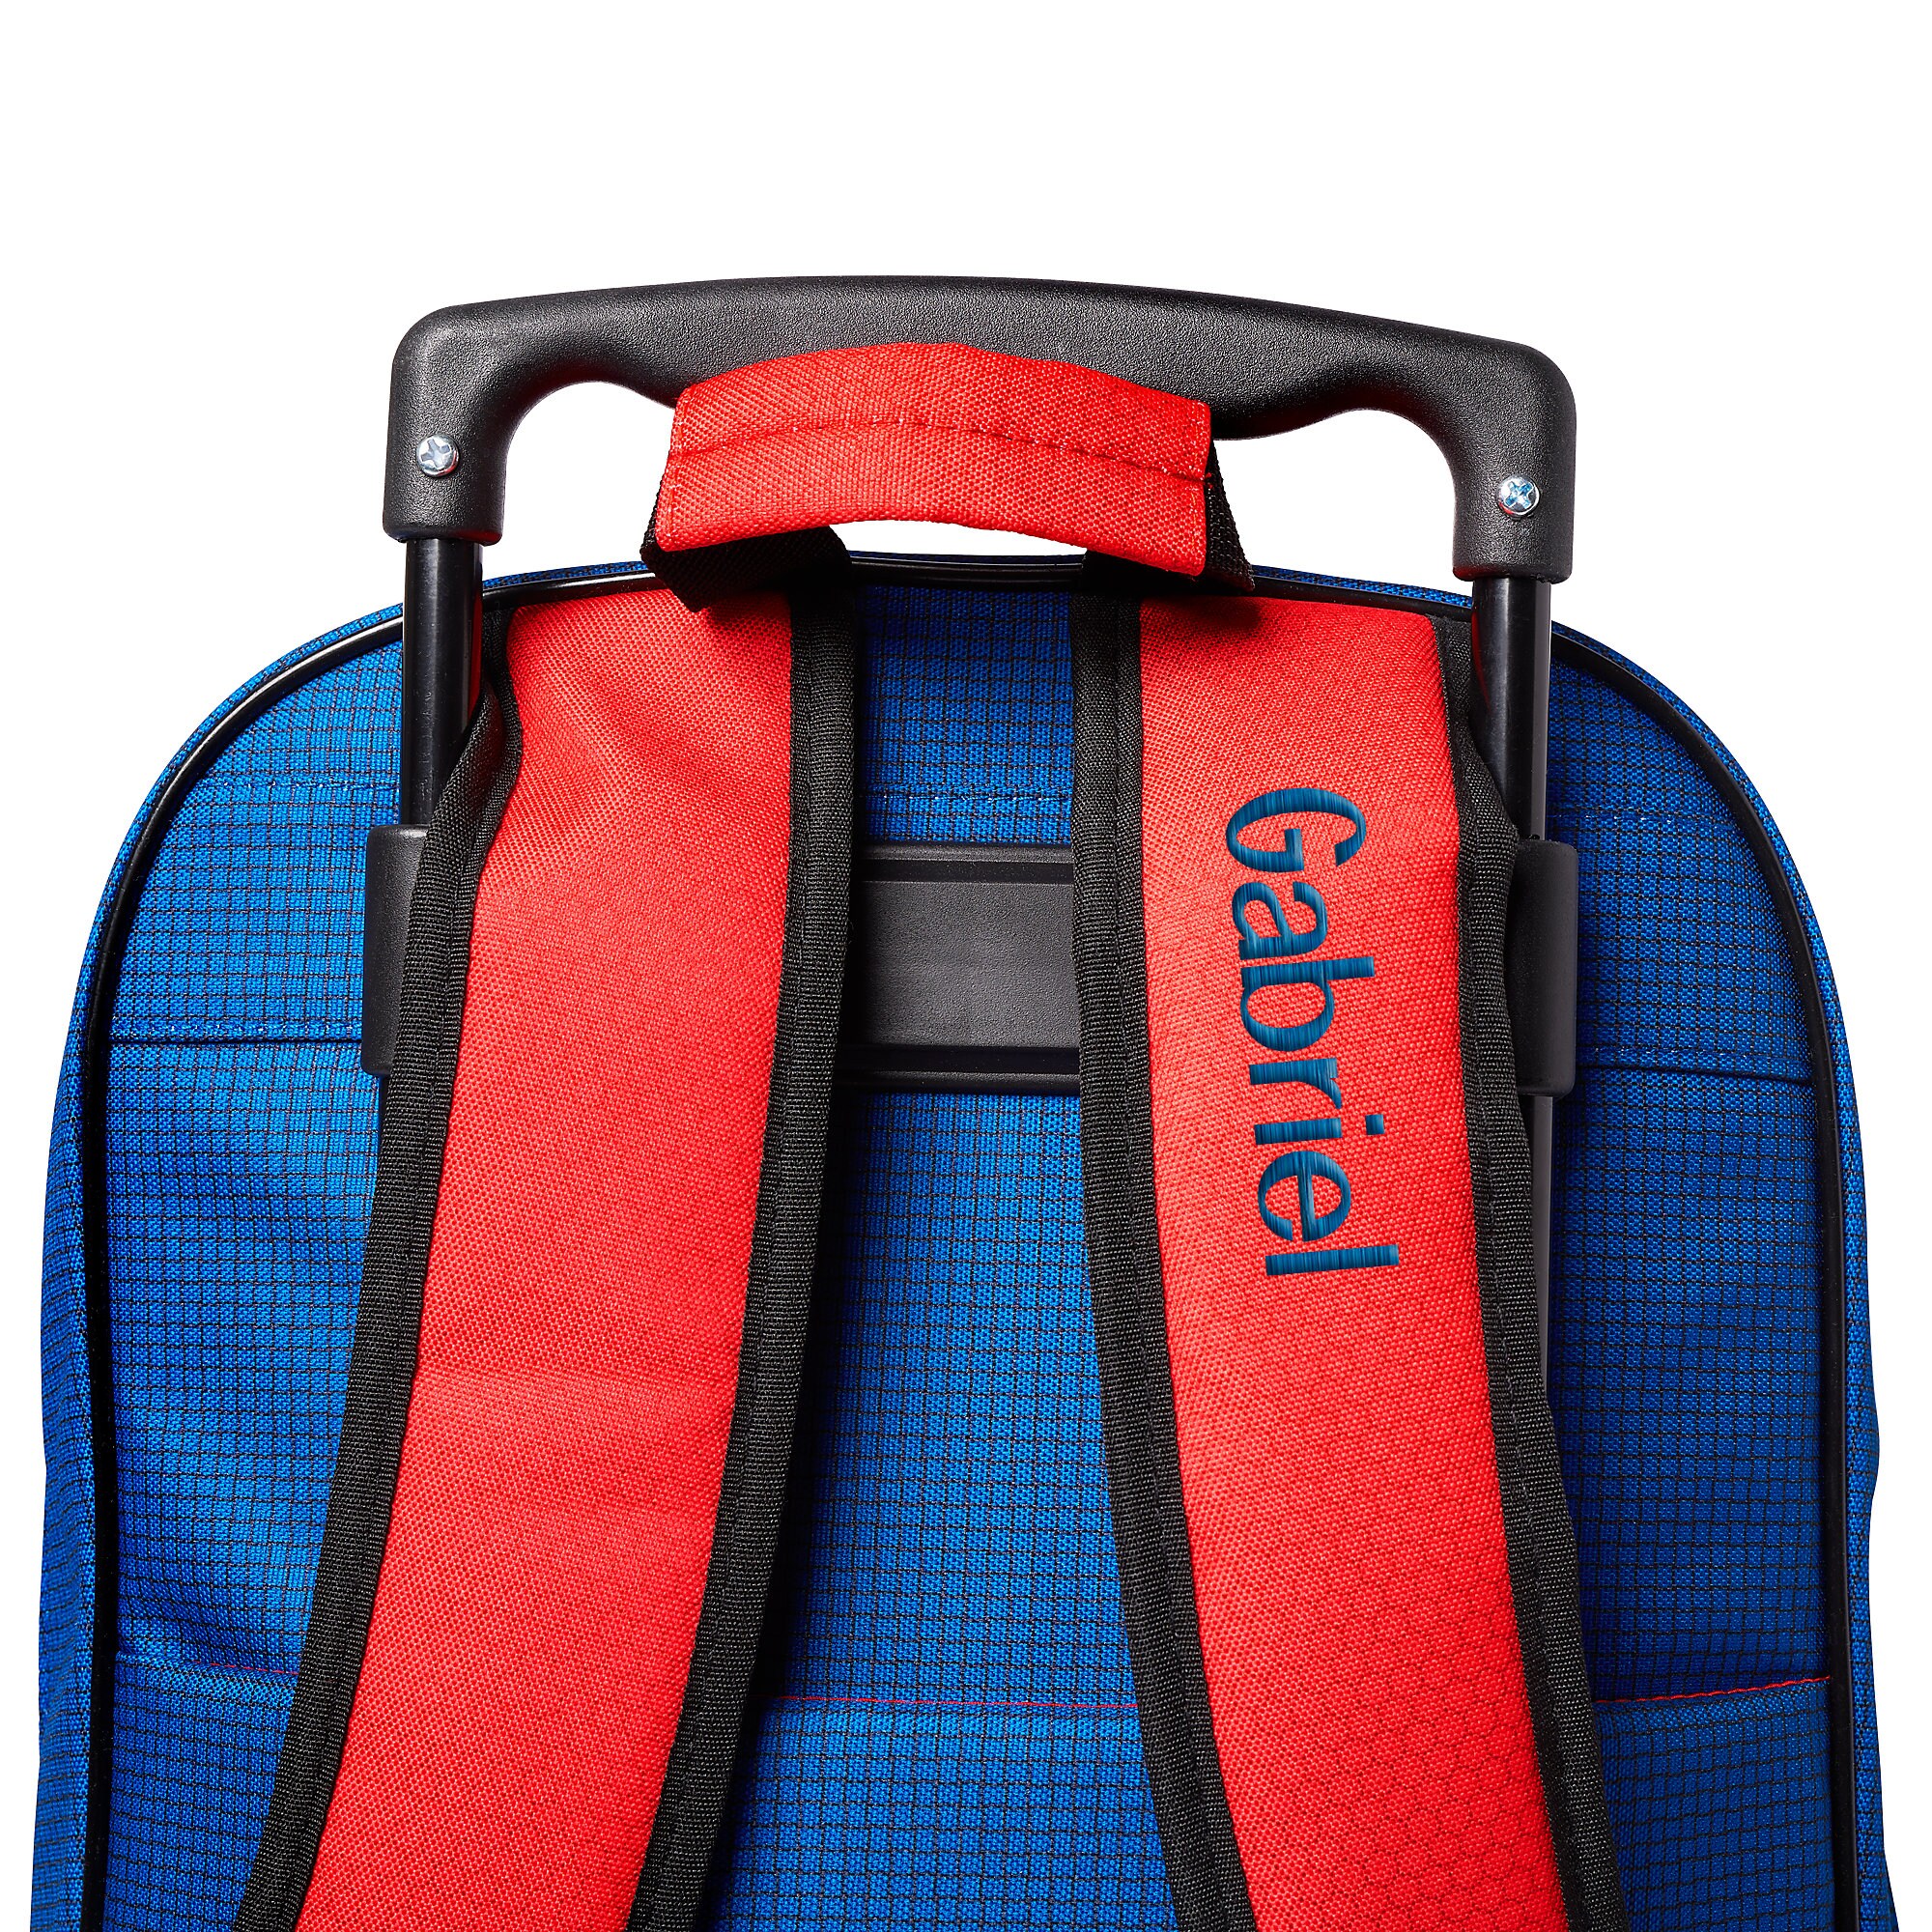 Spider-Man Rolling Backpack - Personalized